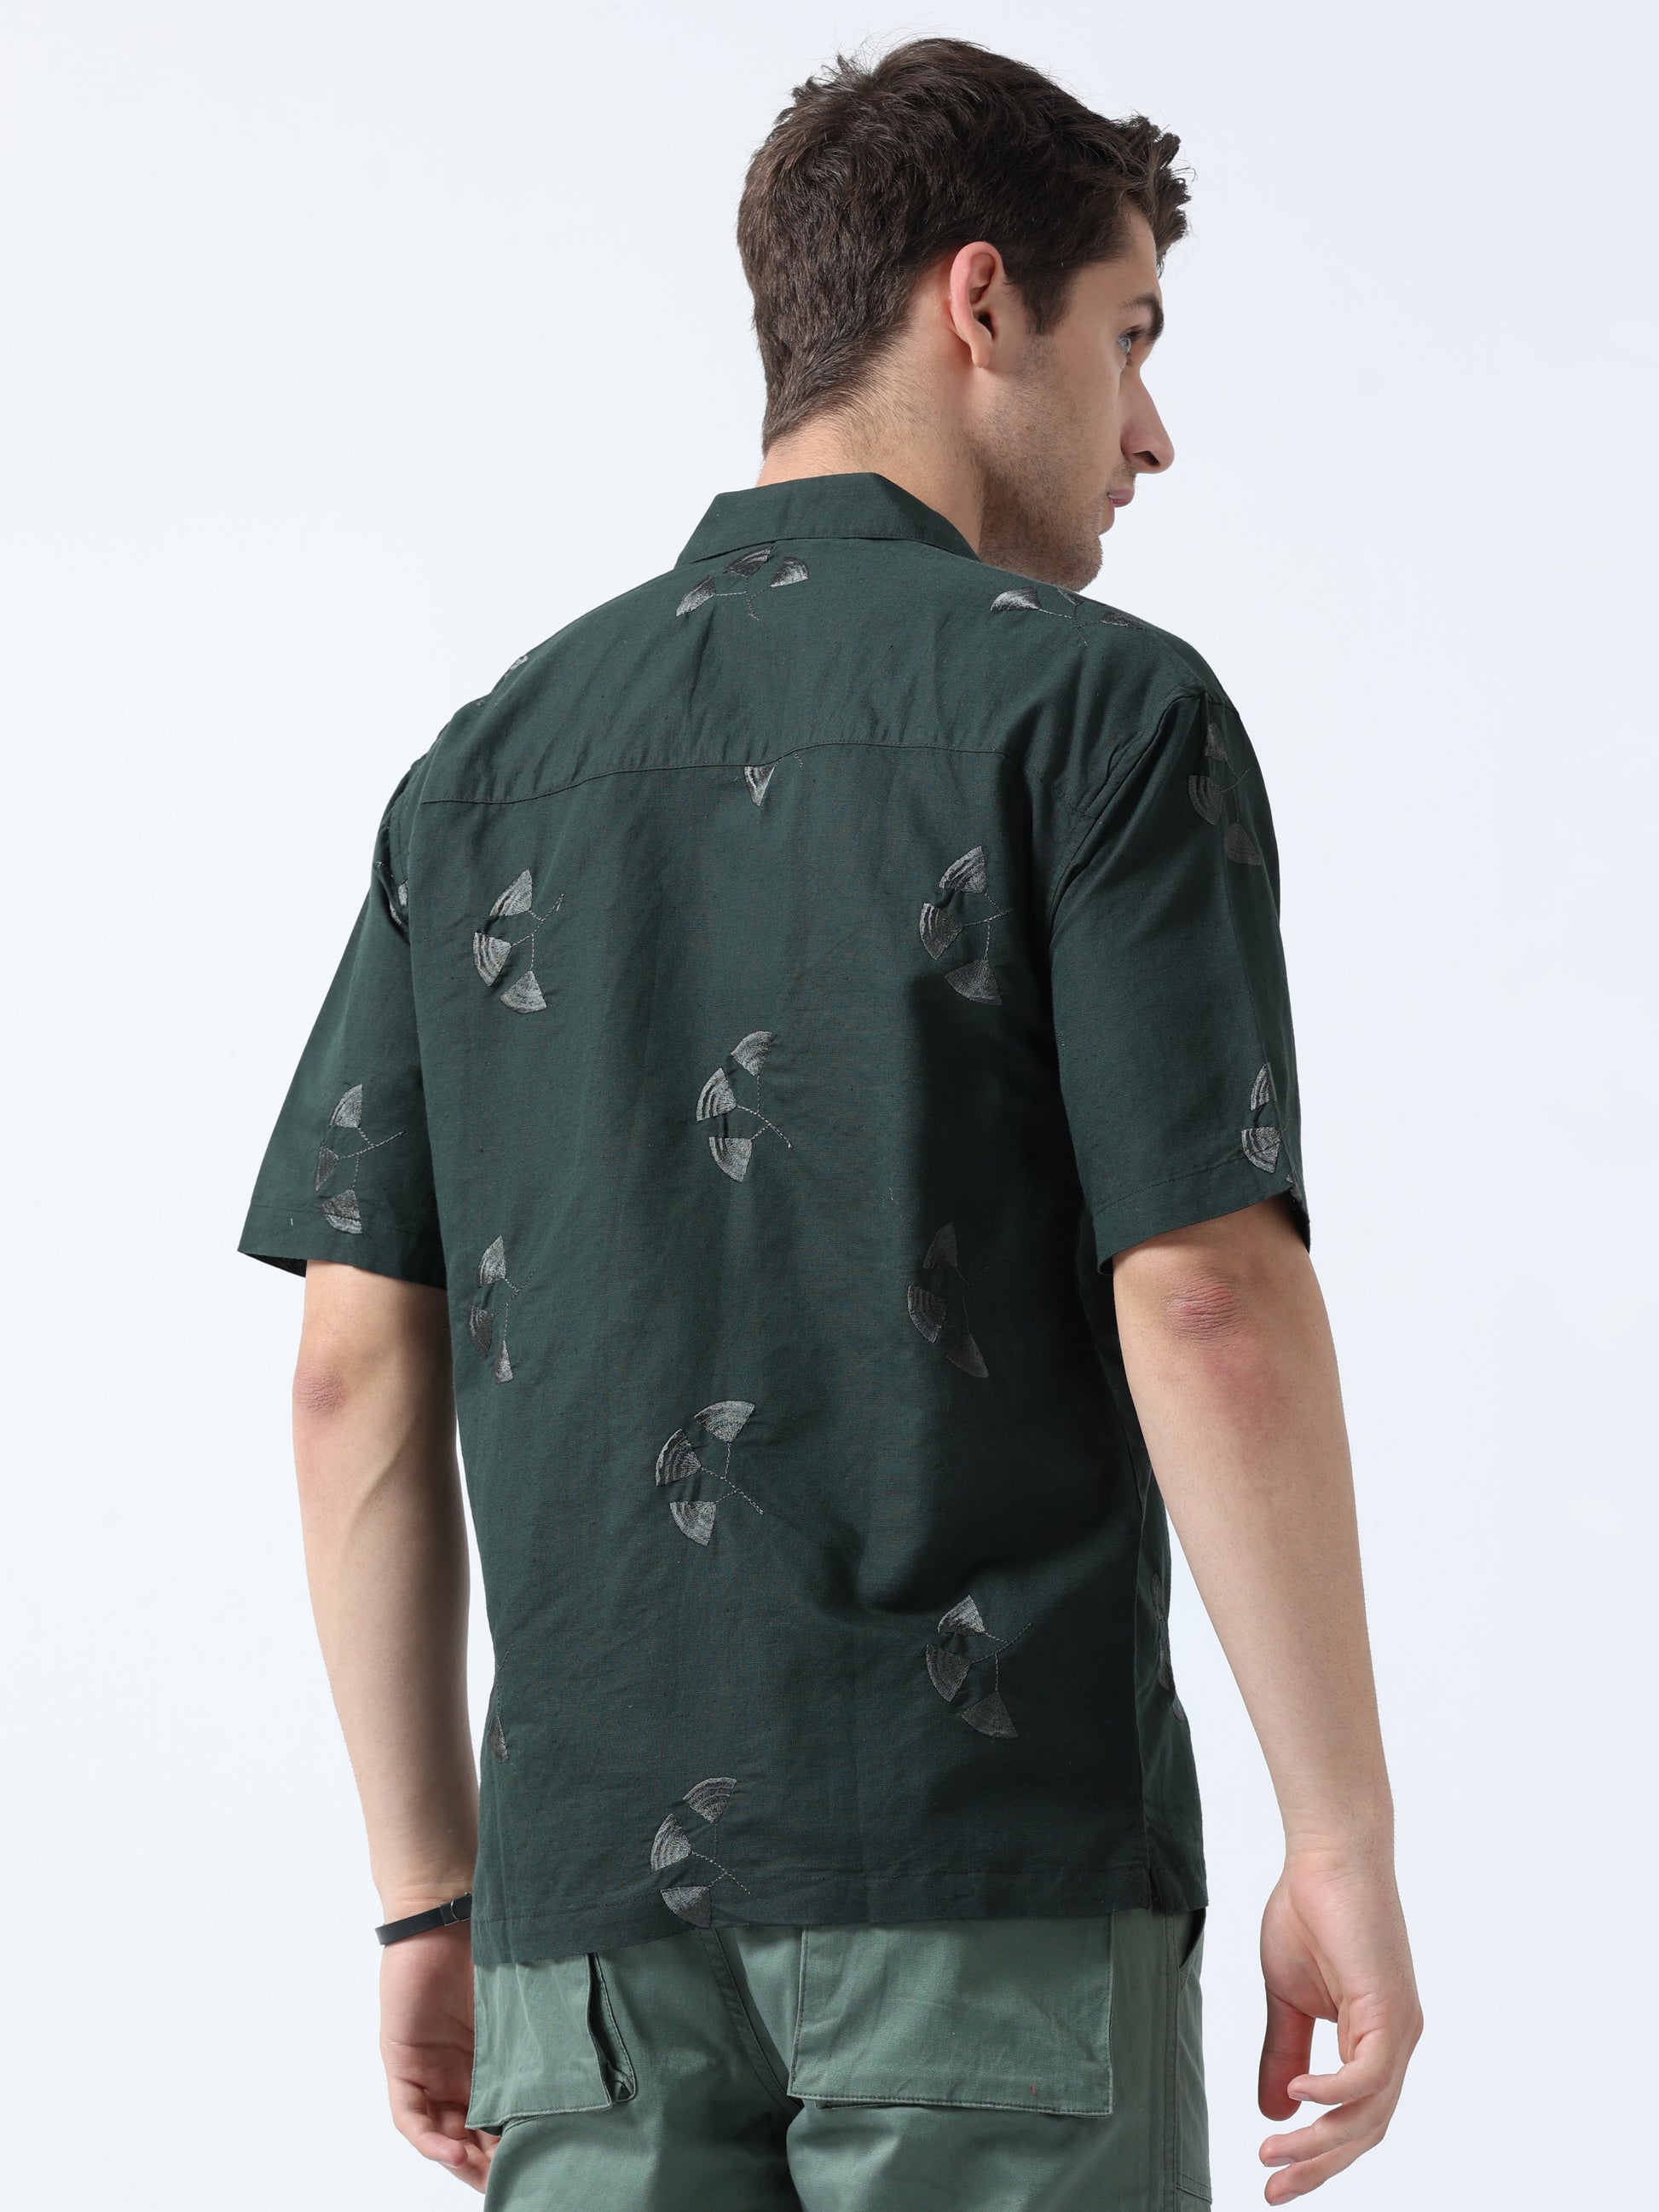 Green Loose Fit Half Sleeve Embroidered Men's Printed Shirt